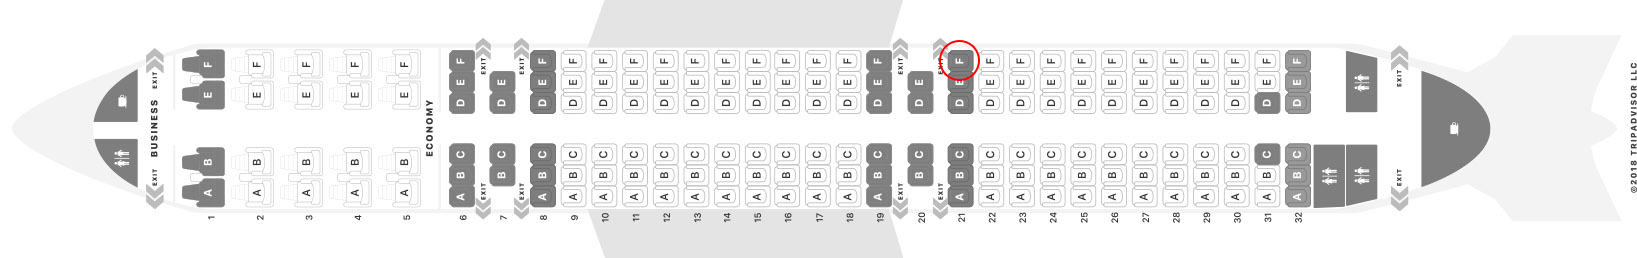 Tap A321neo Seat Map